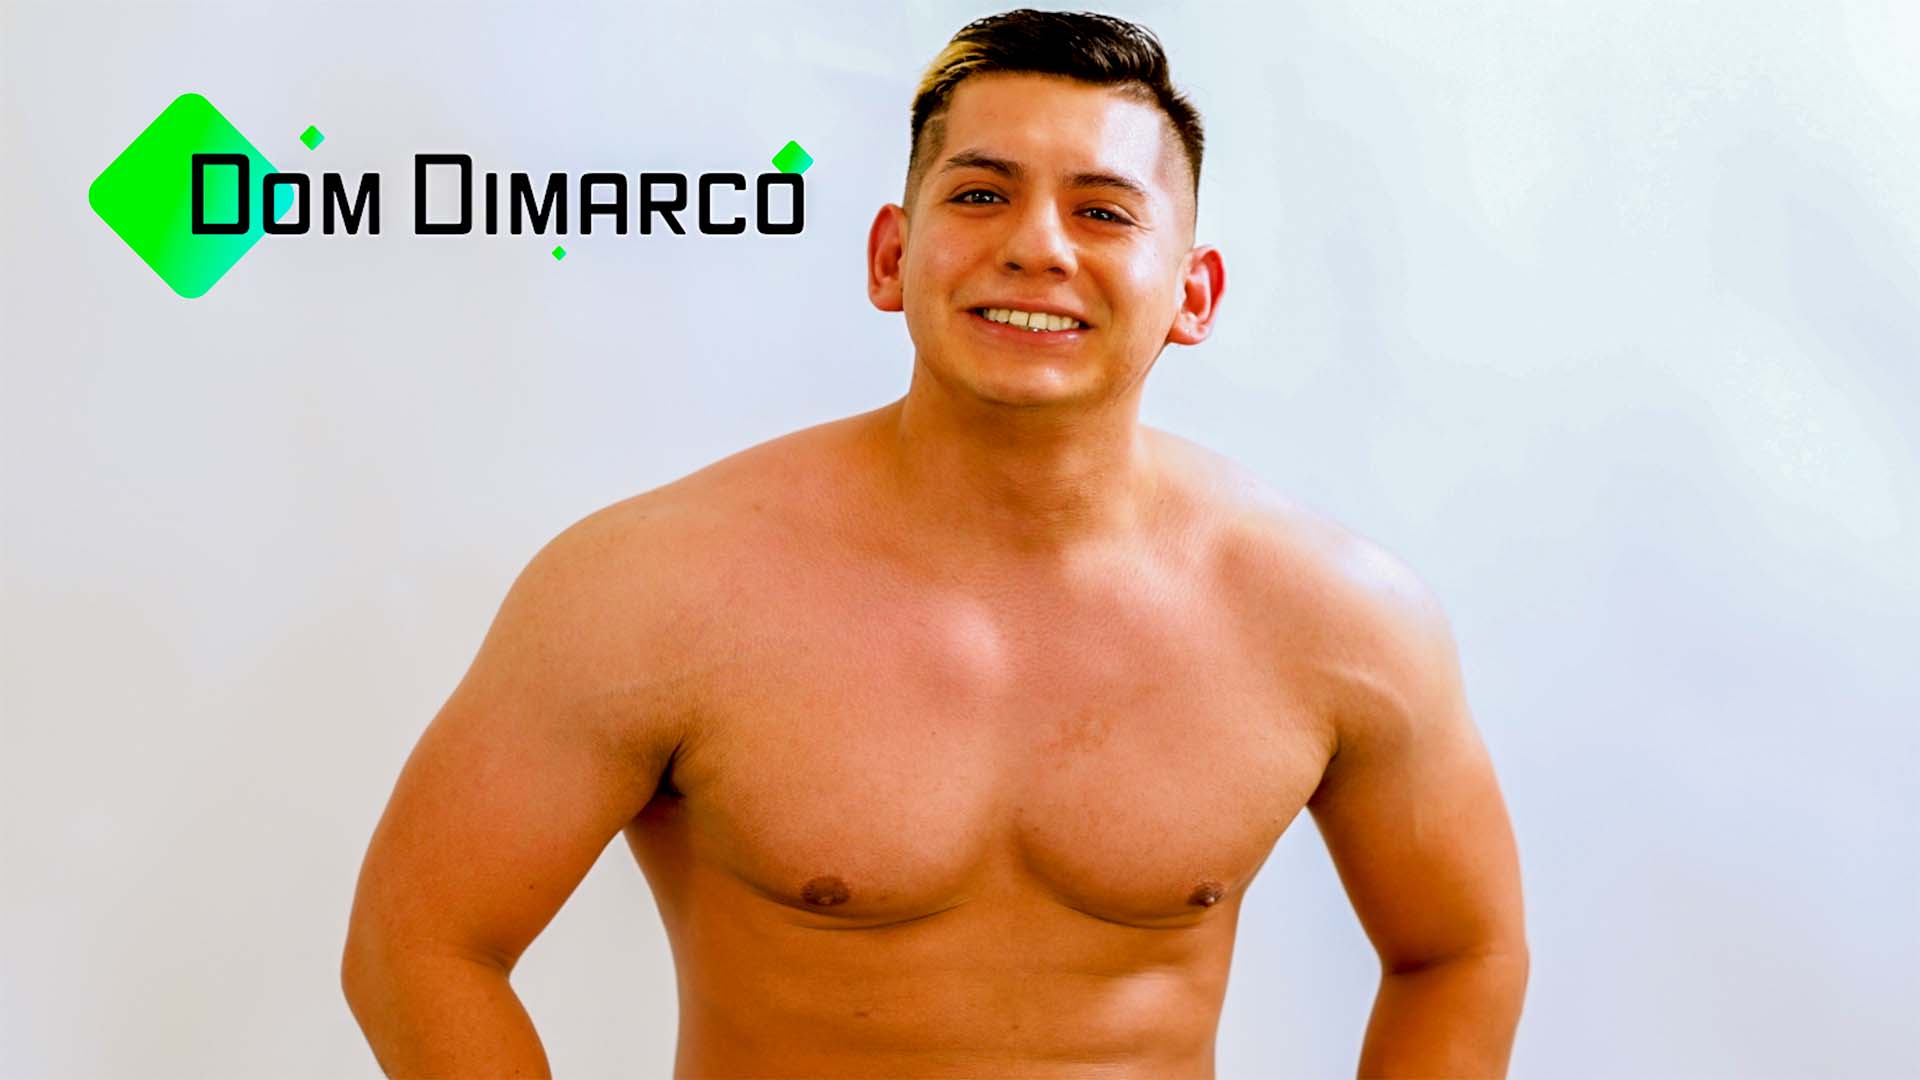 Interview: Hot Dom DiMarco Lives A Wild Life!